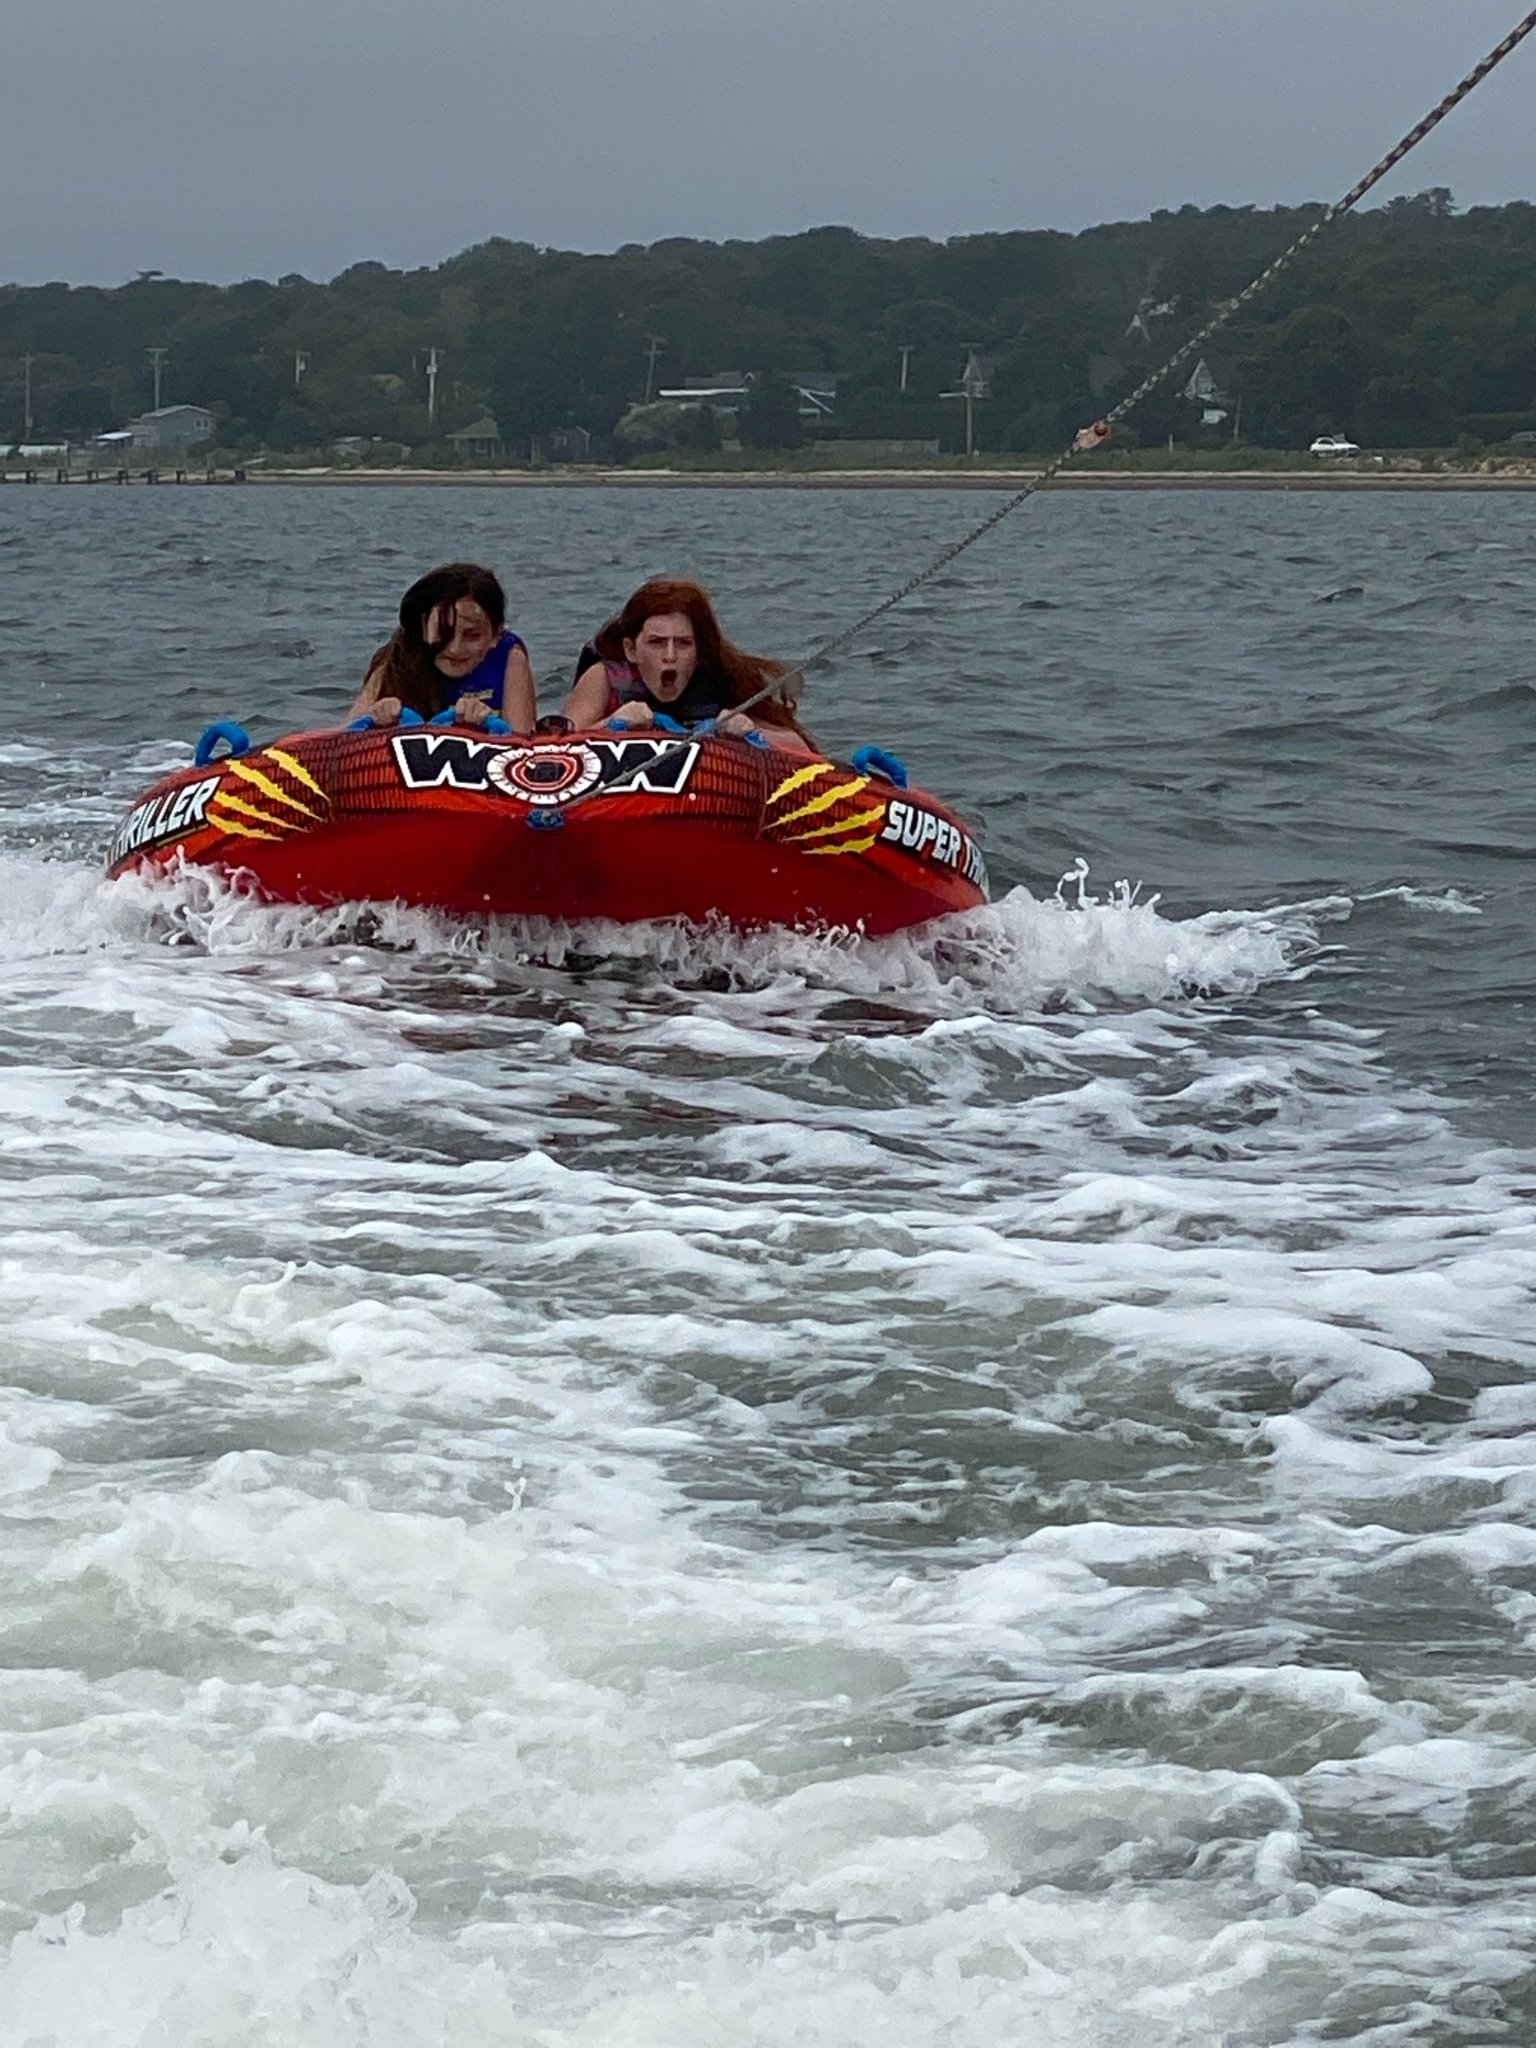 Morgan and Addy holding on for their lives tubing